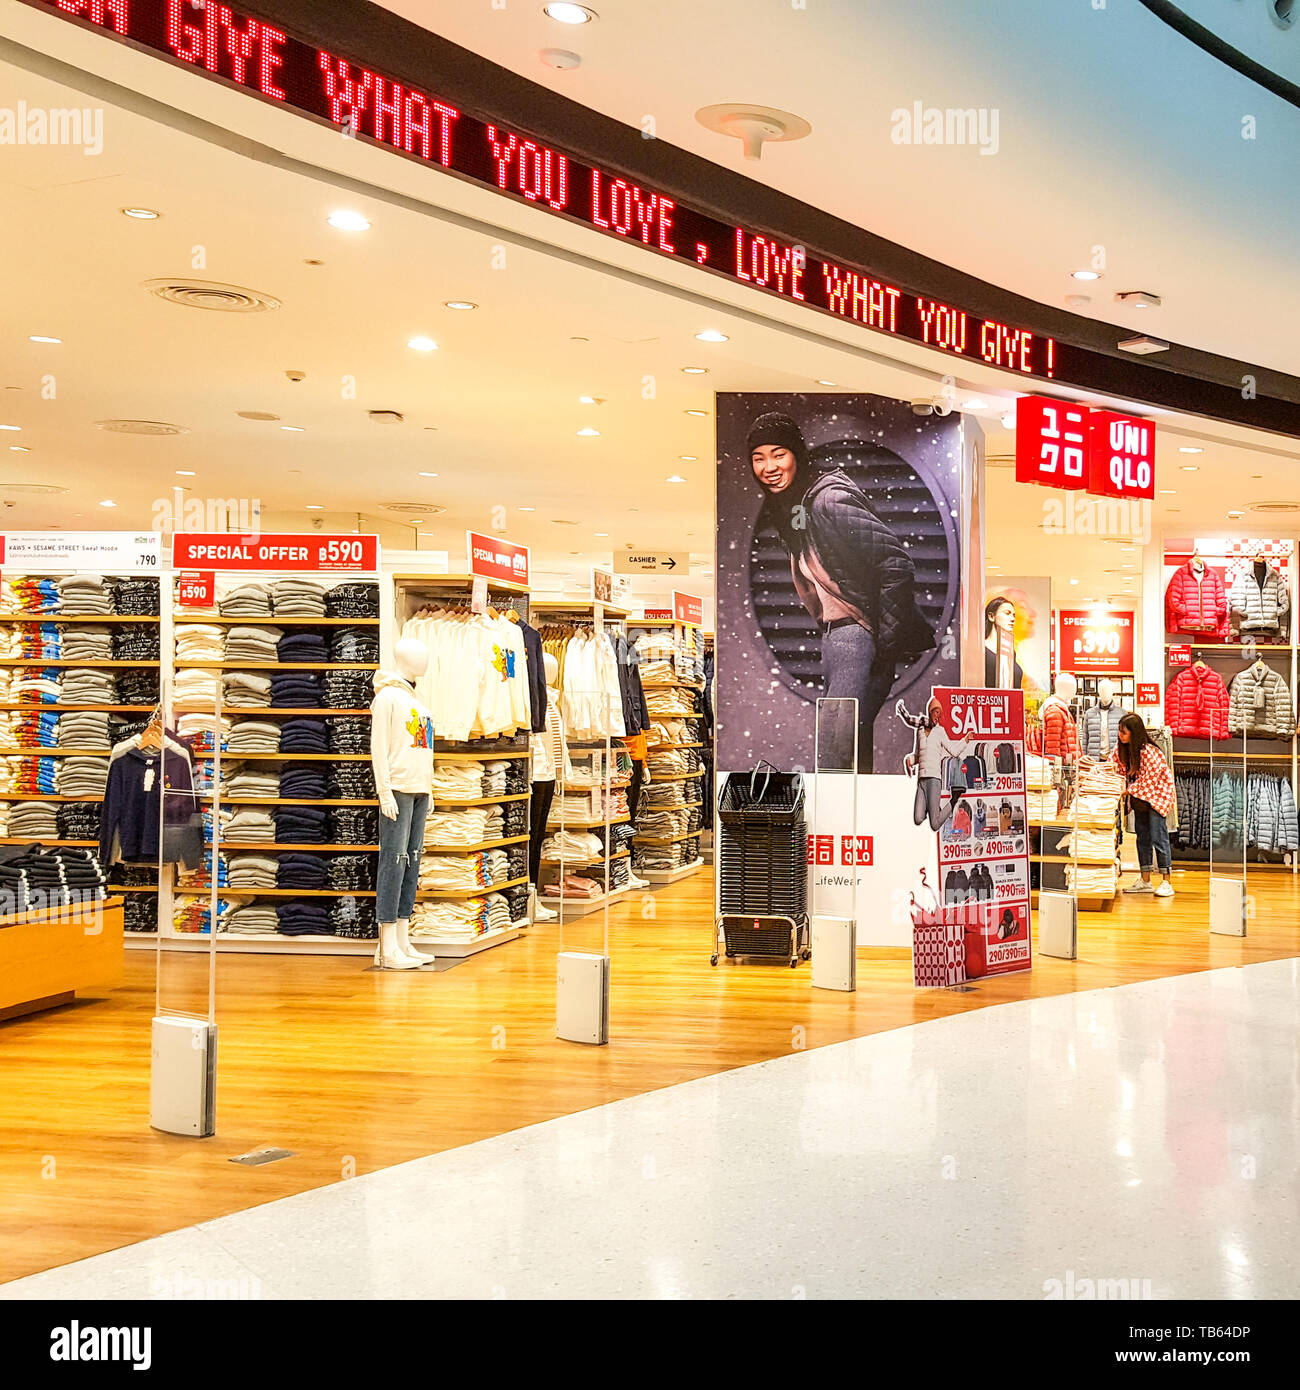 4 Proven Reasons Why Uniqlo Is A Fast Fashion Brand  Panaprium